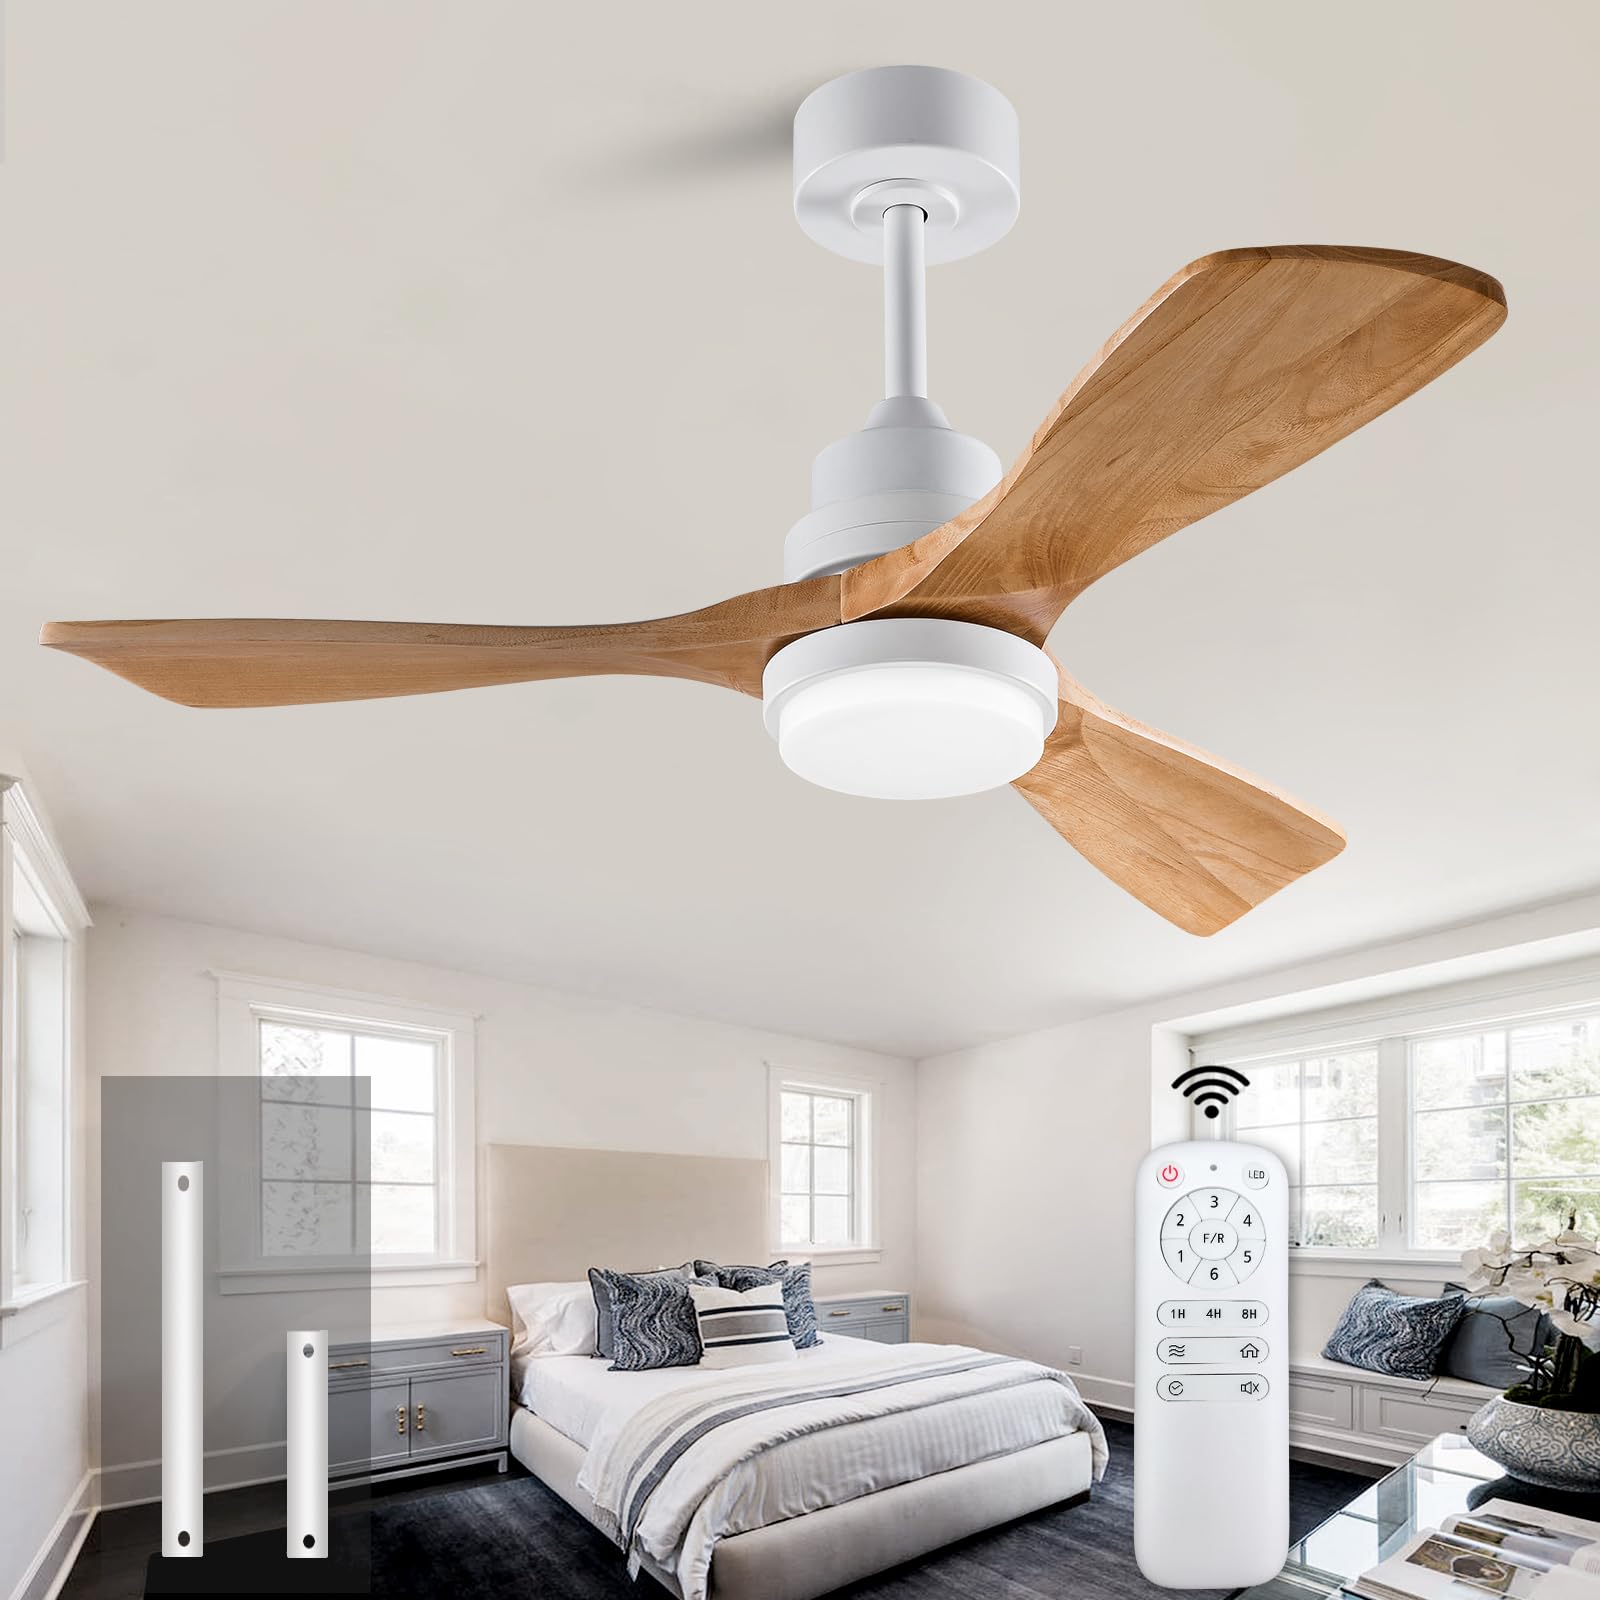 XBIBI Ceiling Fan with Light Remote Control